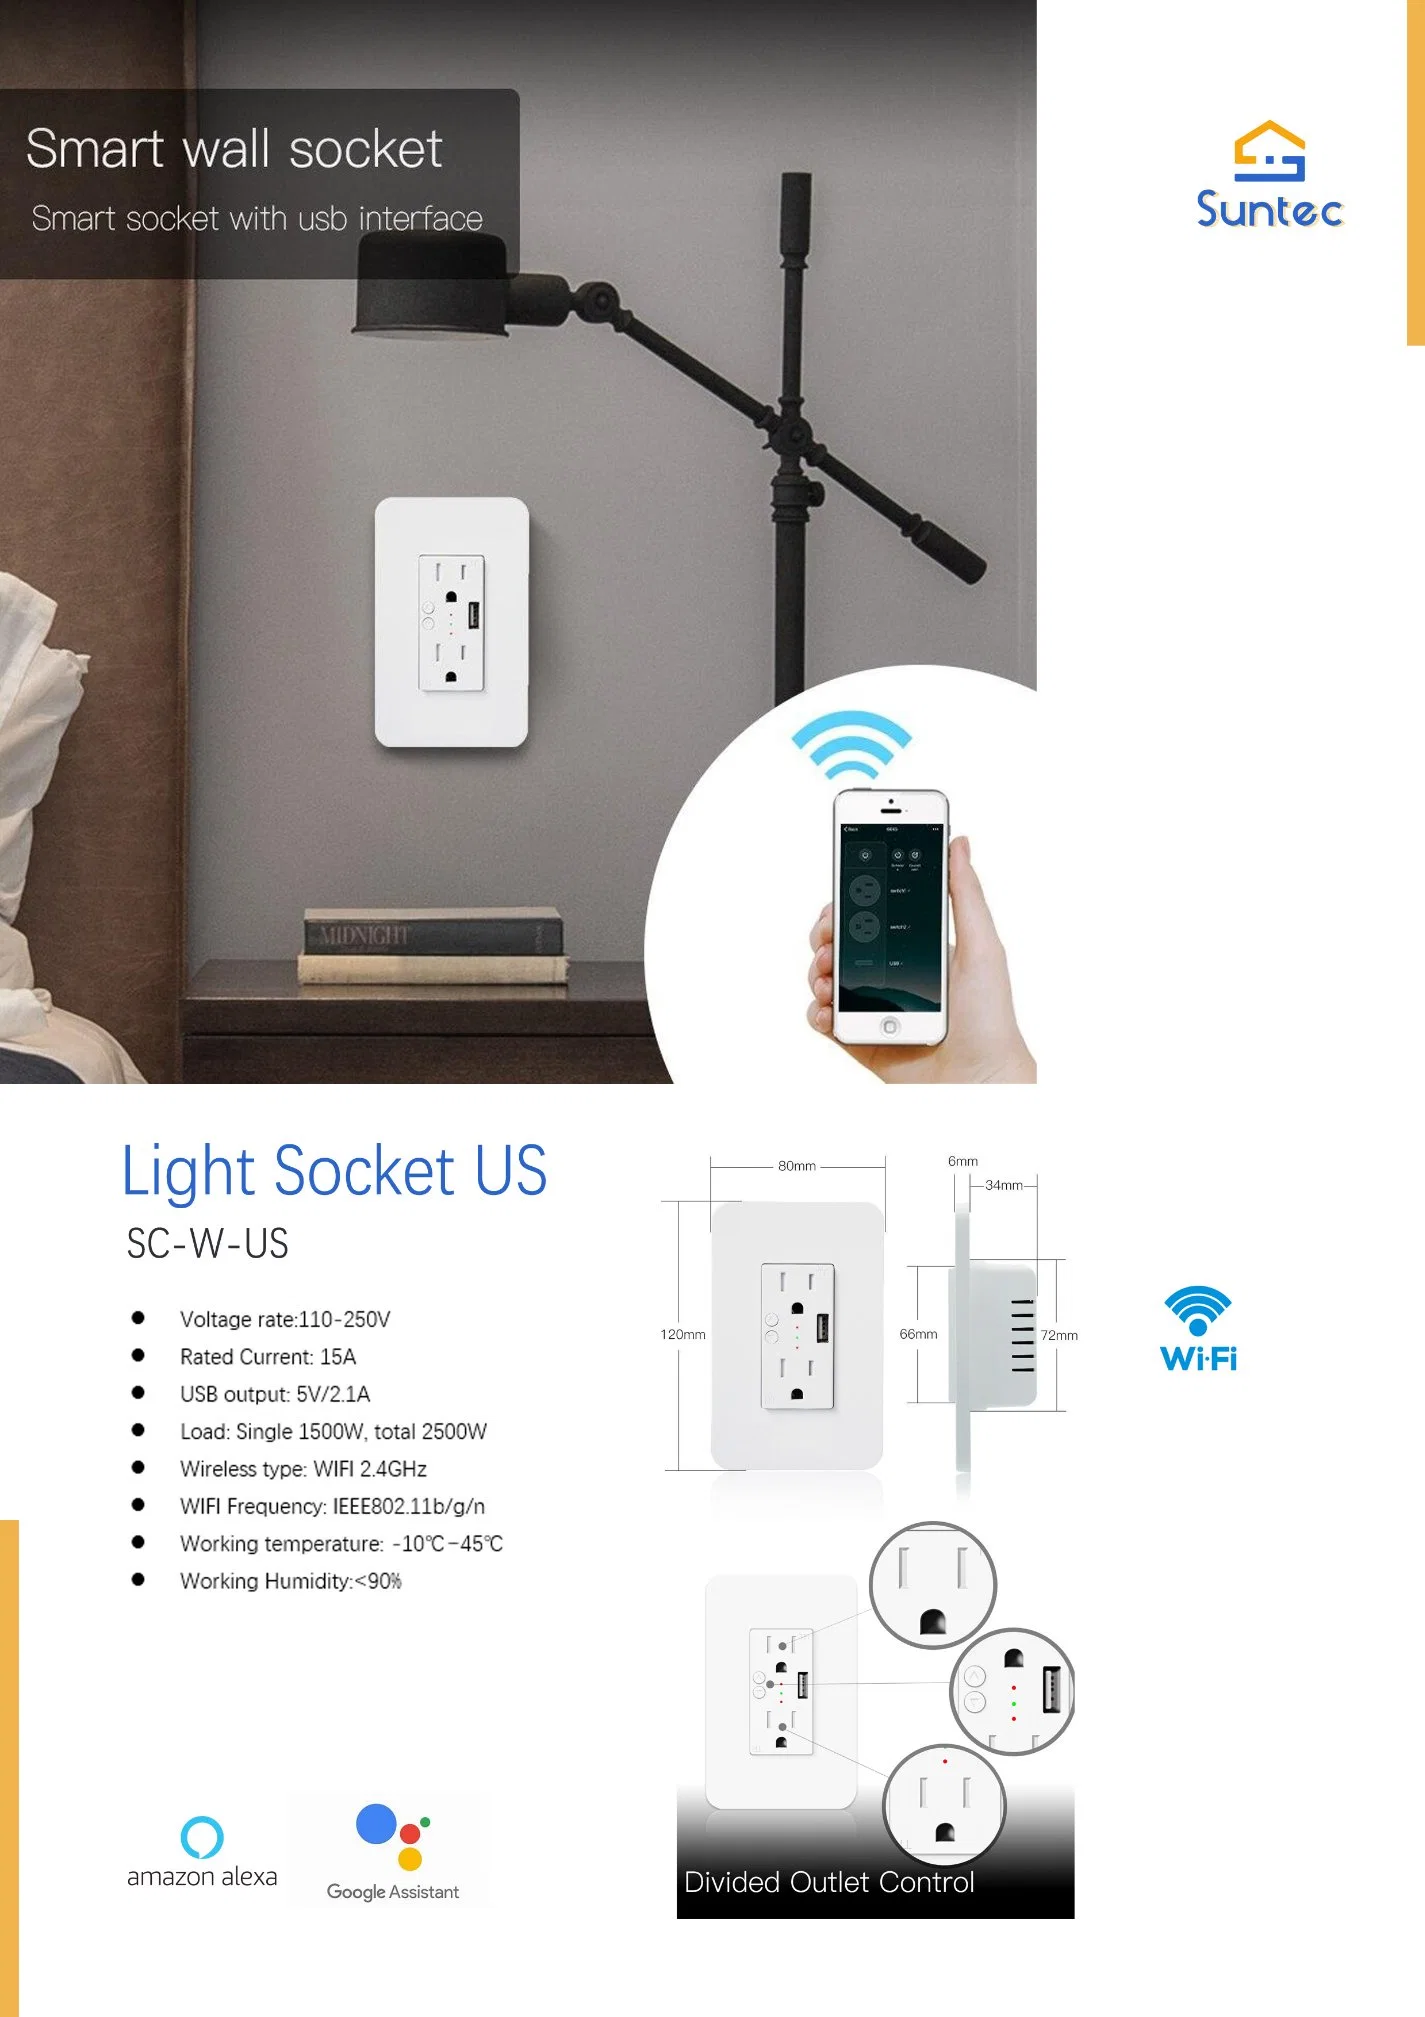 WiFi Smart Electrical USB Socket with 2 USB Plug Outlet Controlled Via Smart Phone